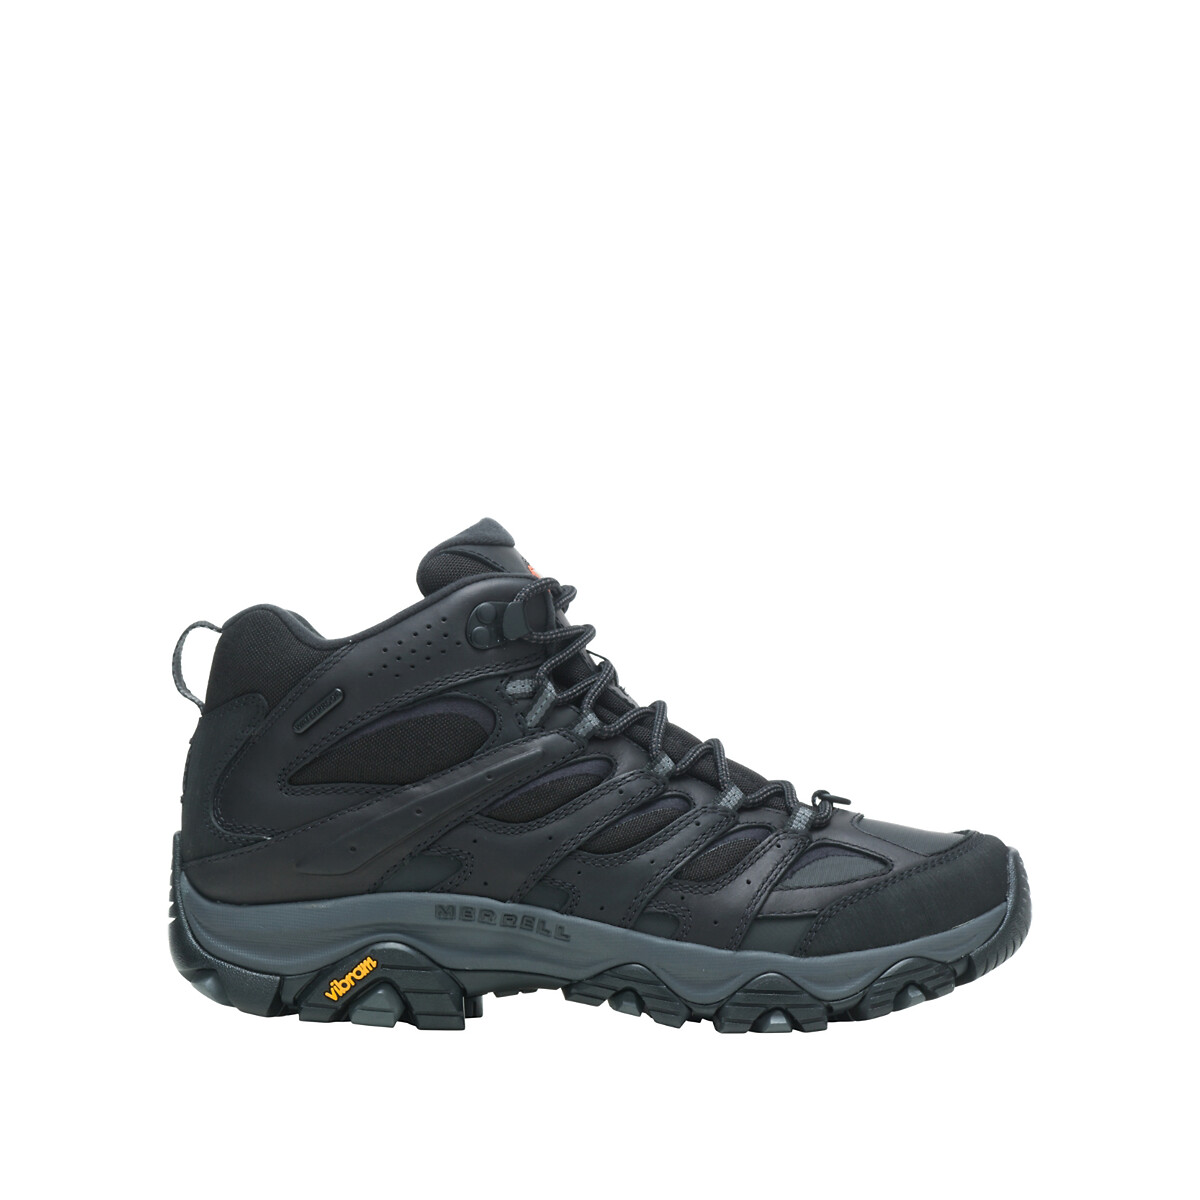 Sneakers Moab 3 Thermo Mid WP von Merrell